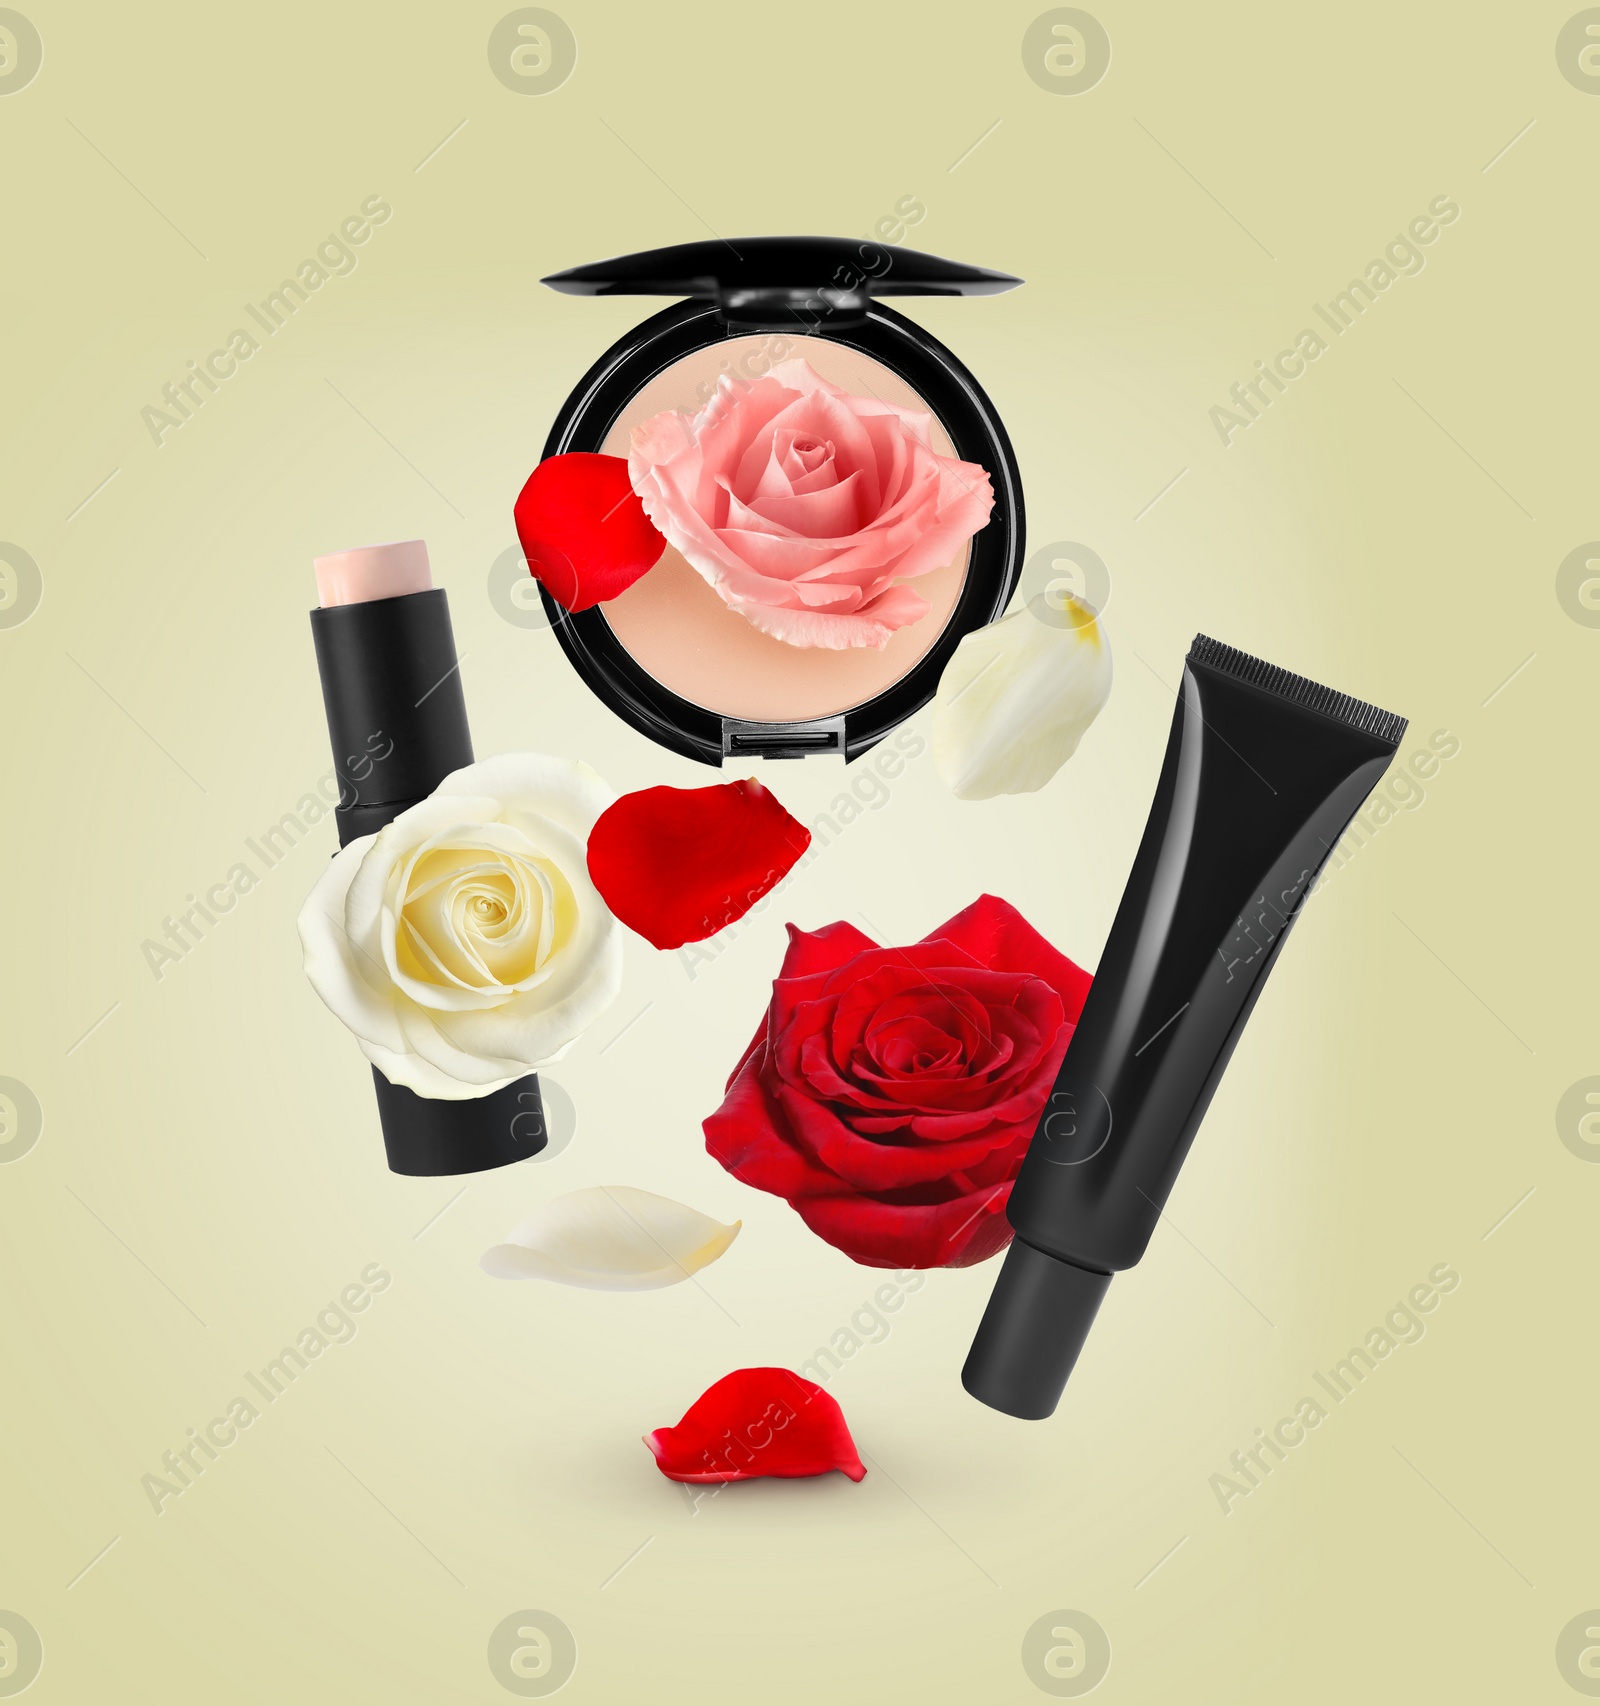 Image of Different makeup products and beautiful roses in air on light yellow background